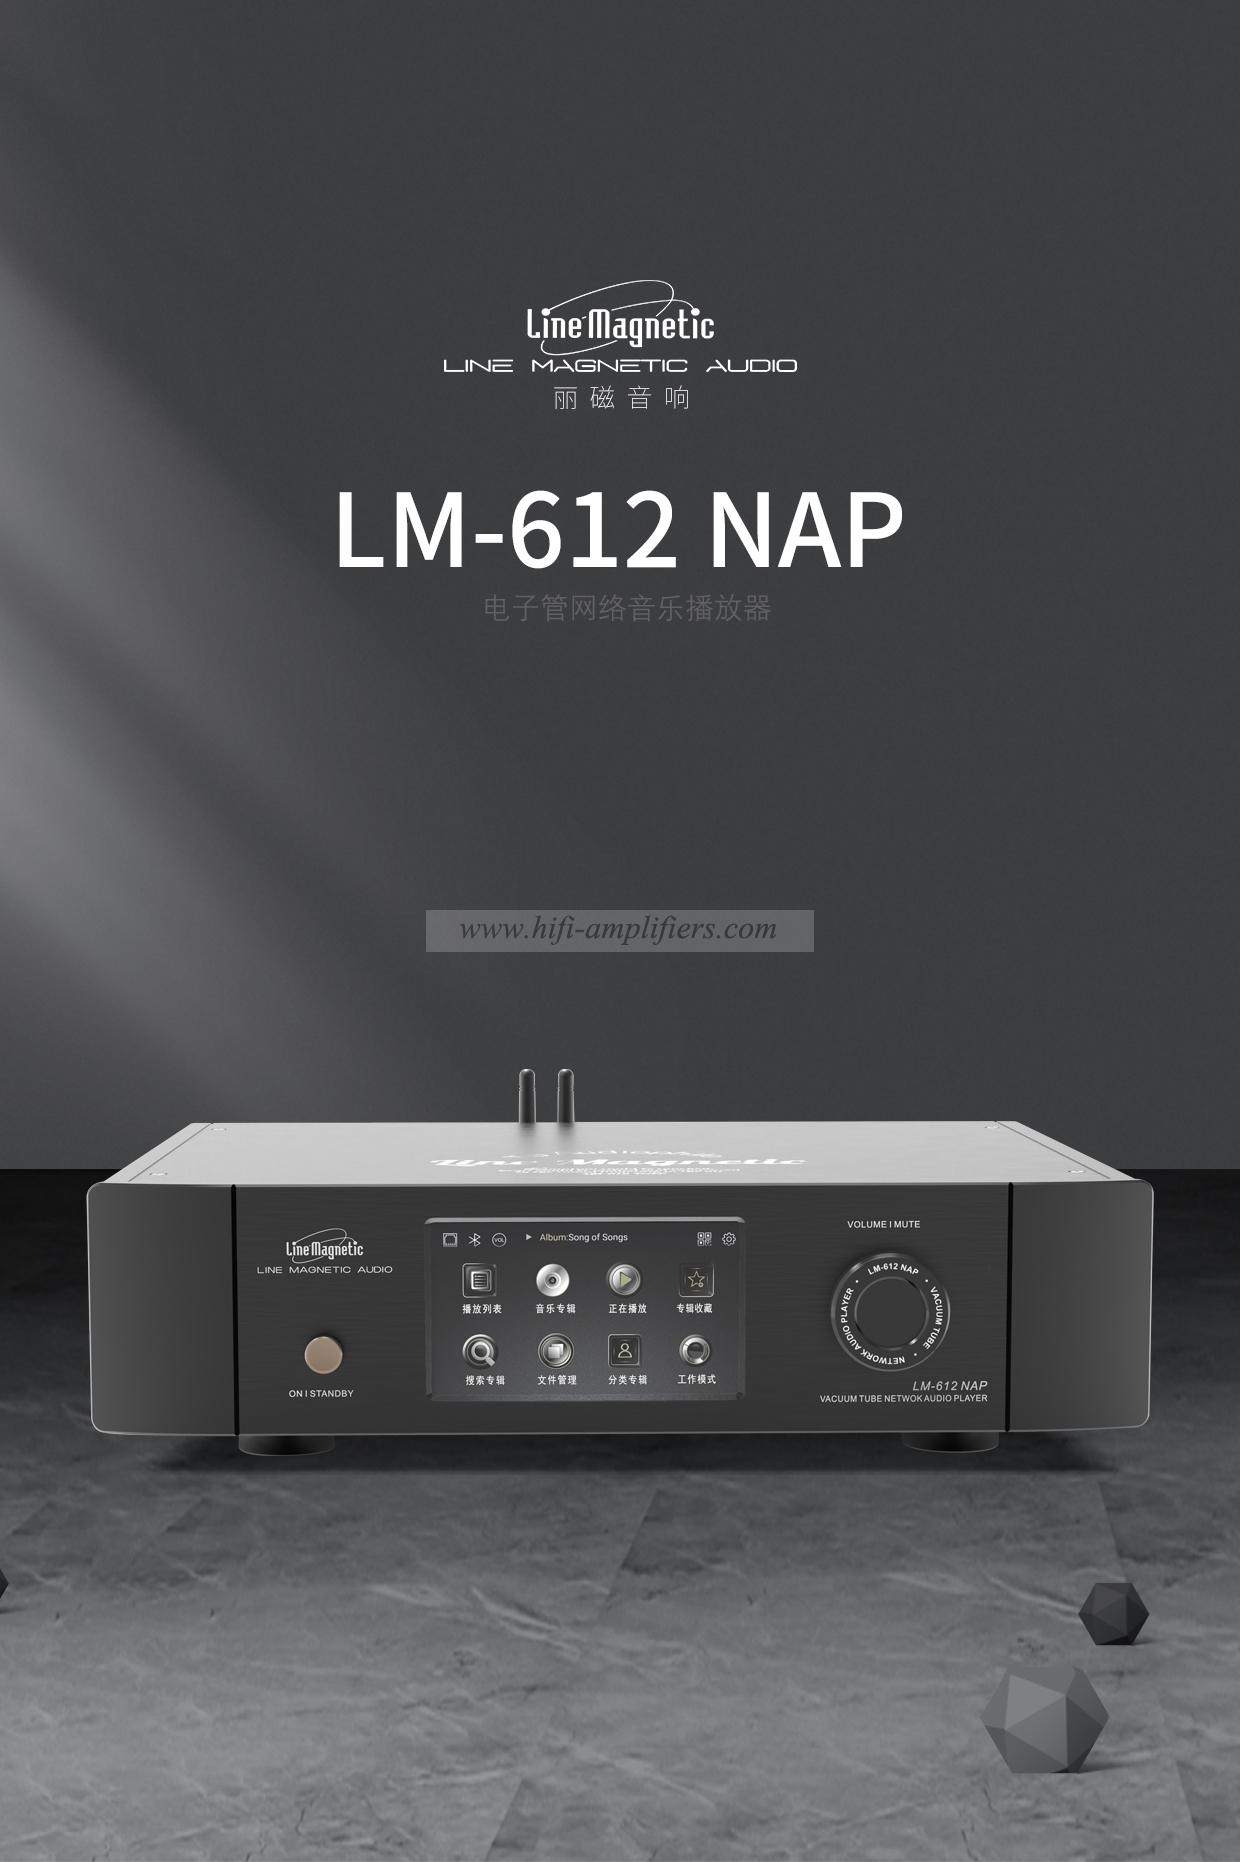 Line Magnetic LM-612NAP Vacuum Tube Network Music Player DSD Source Code Output ESS9038PRO Chip For D/A Decoding